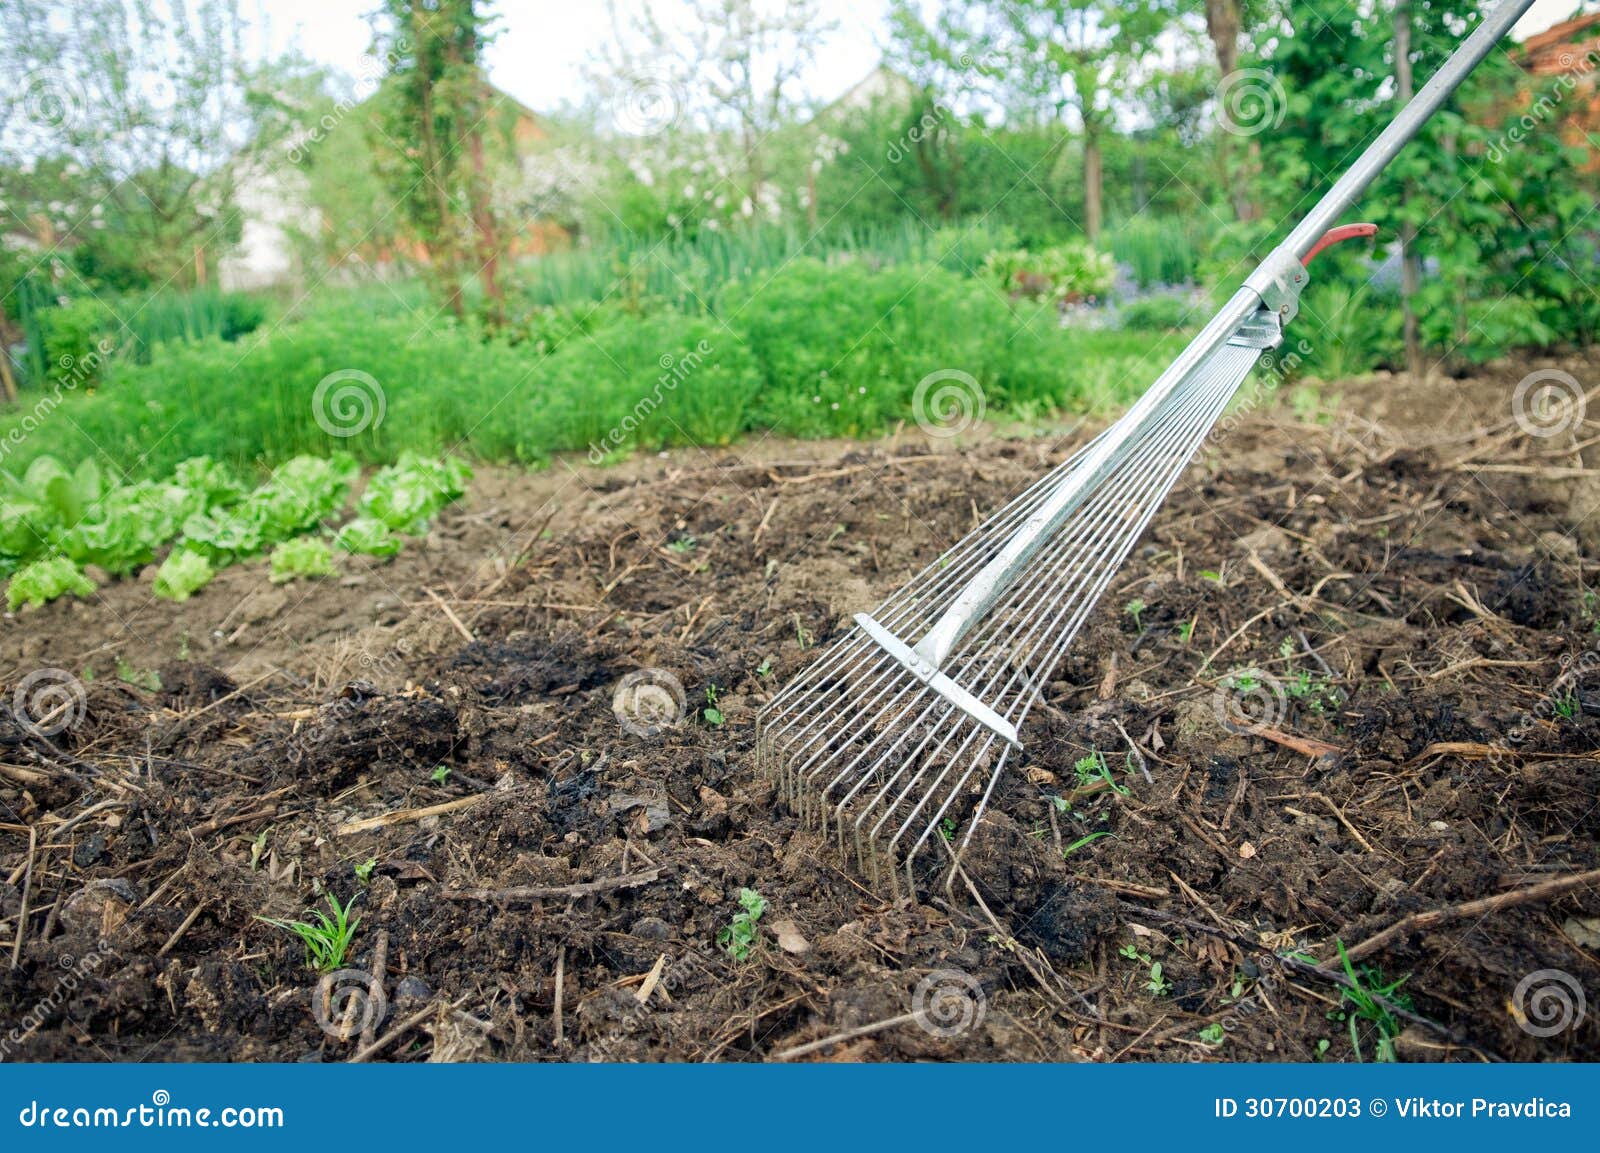 8+ Thousand Compost Tool Royalty-Free Images, Stock Photos & Pictures